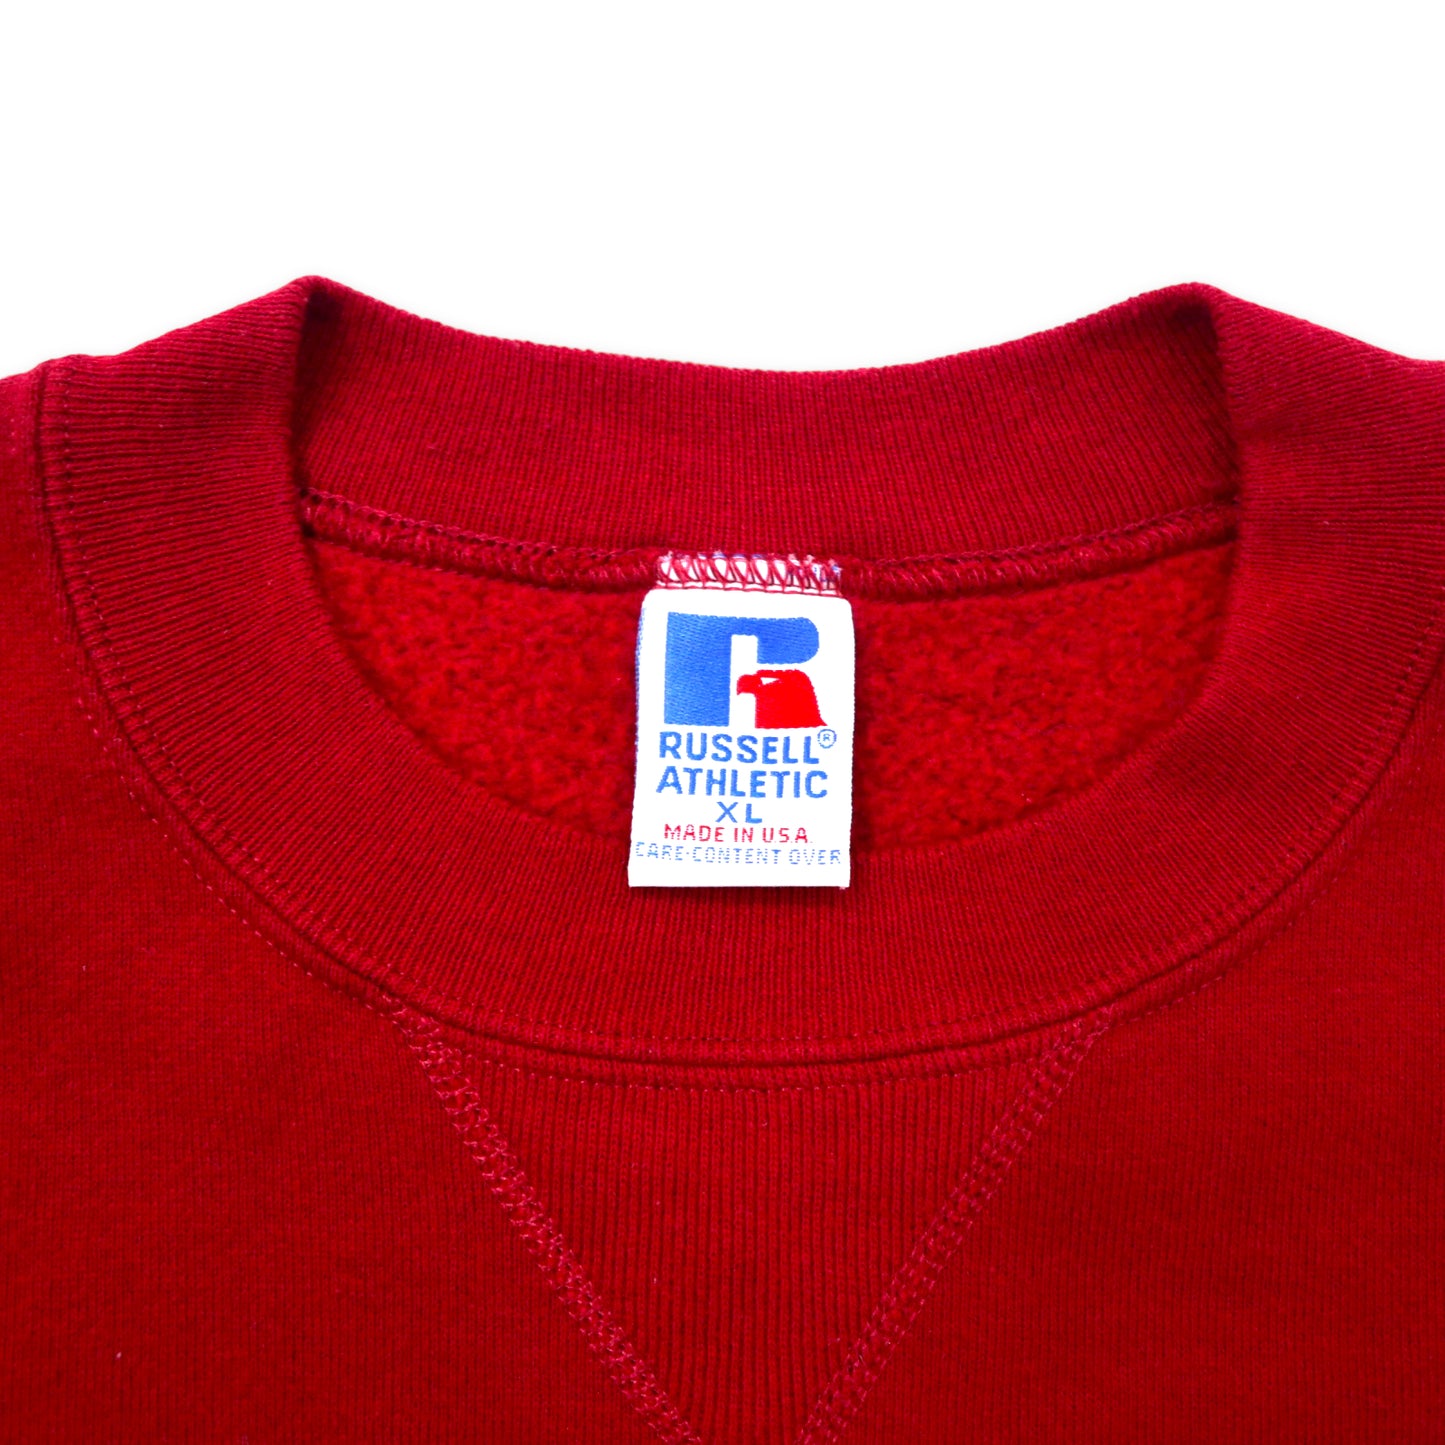 Russell Athletic USA MADE 90s Print Sweatshirt XL Red Cotton 